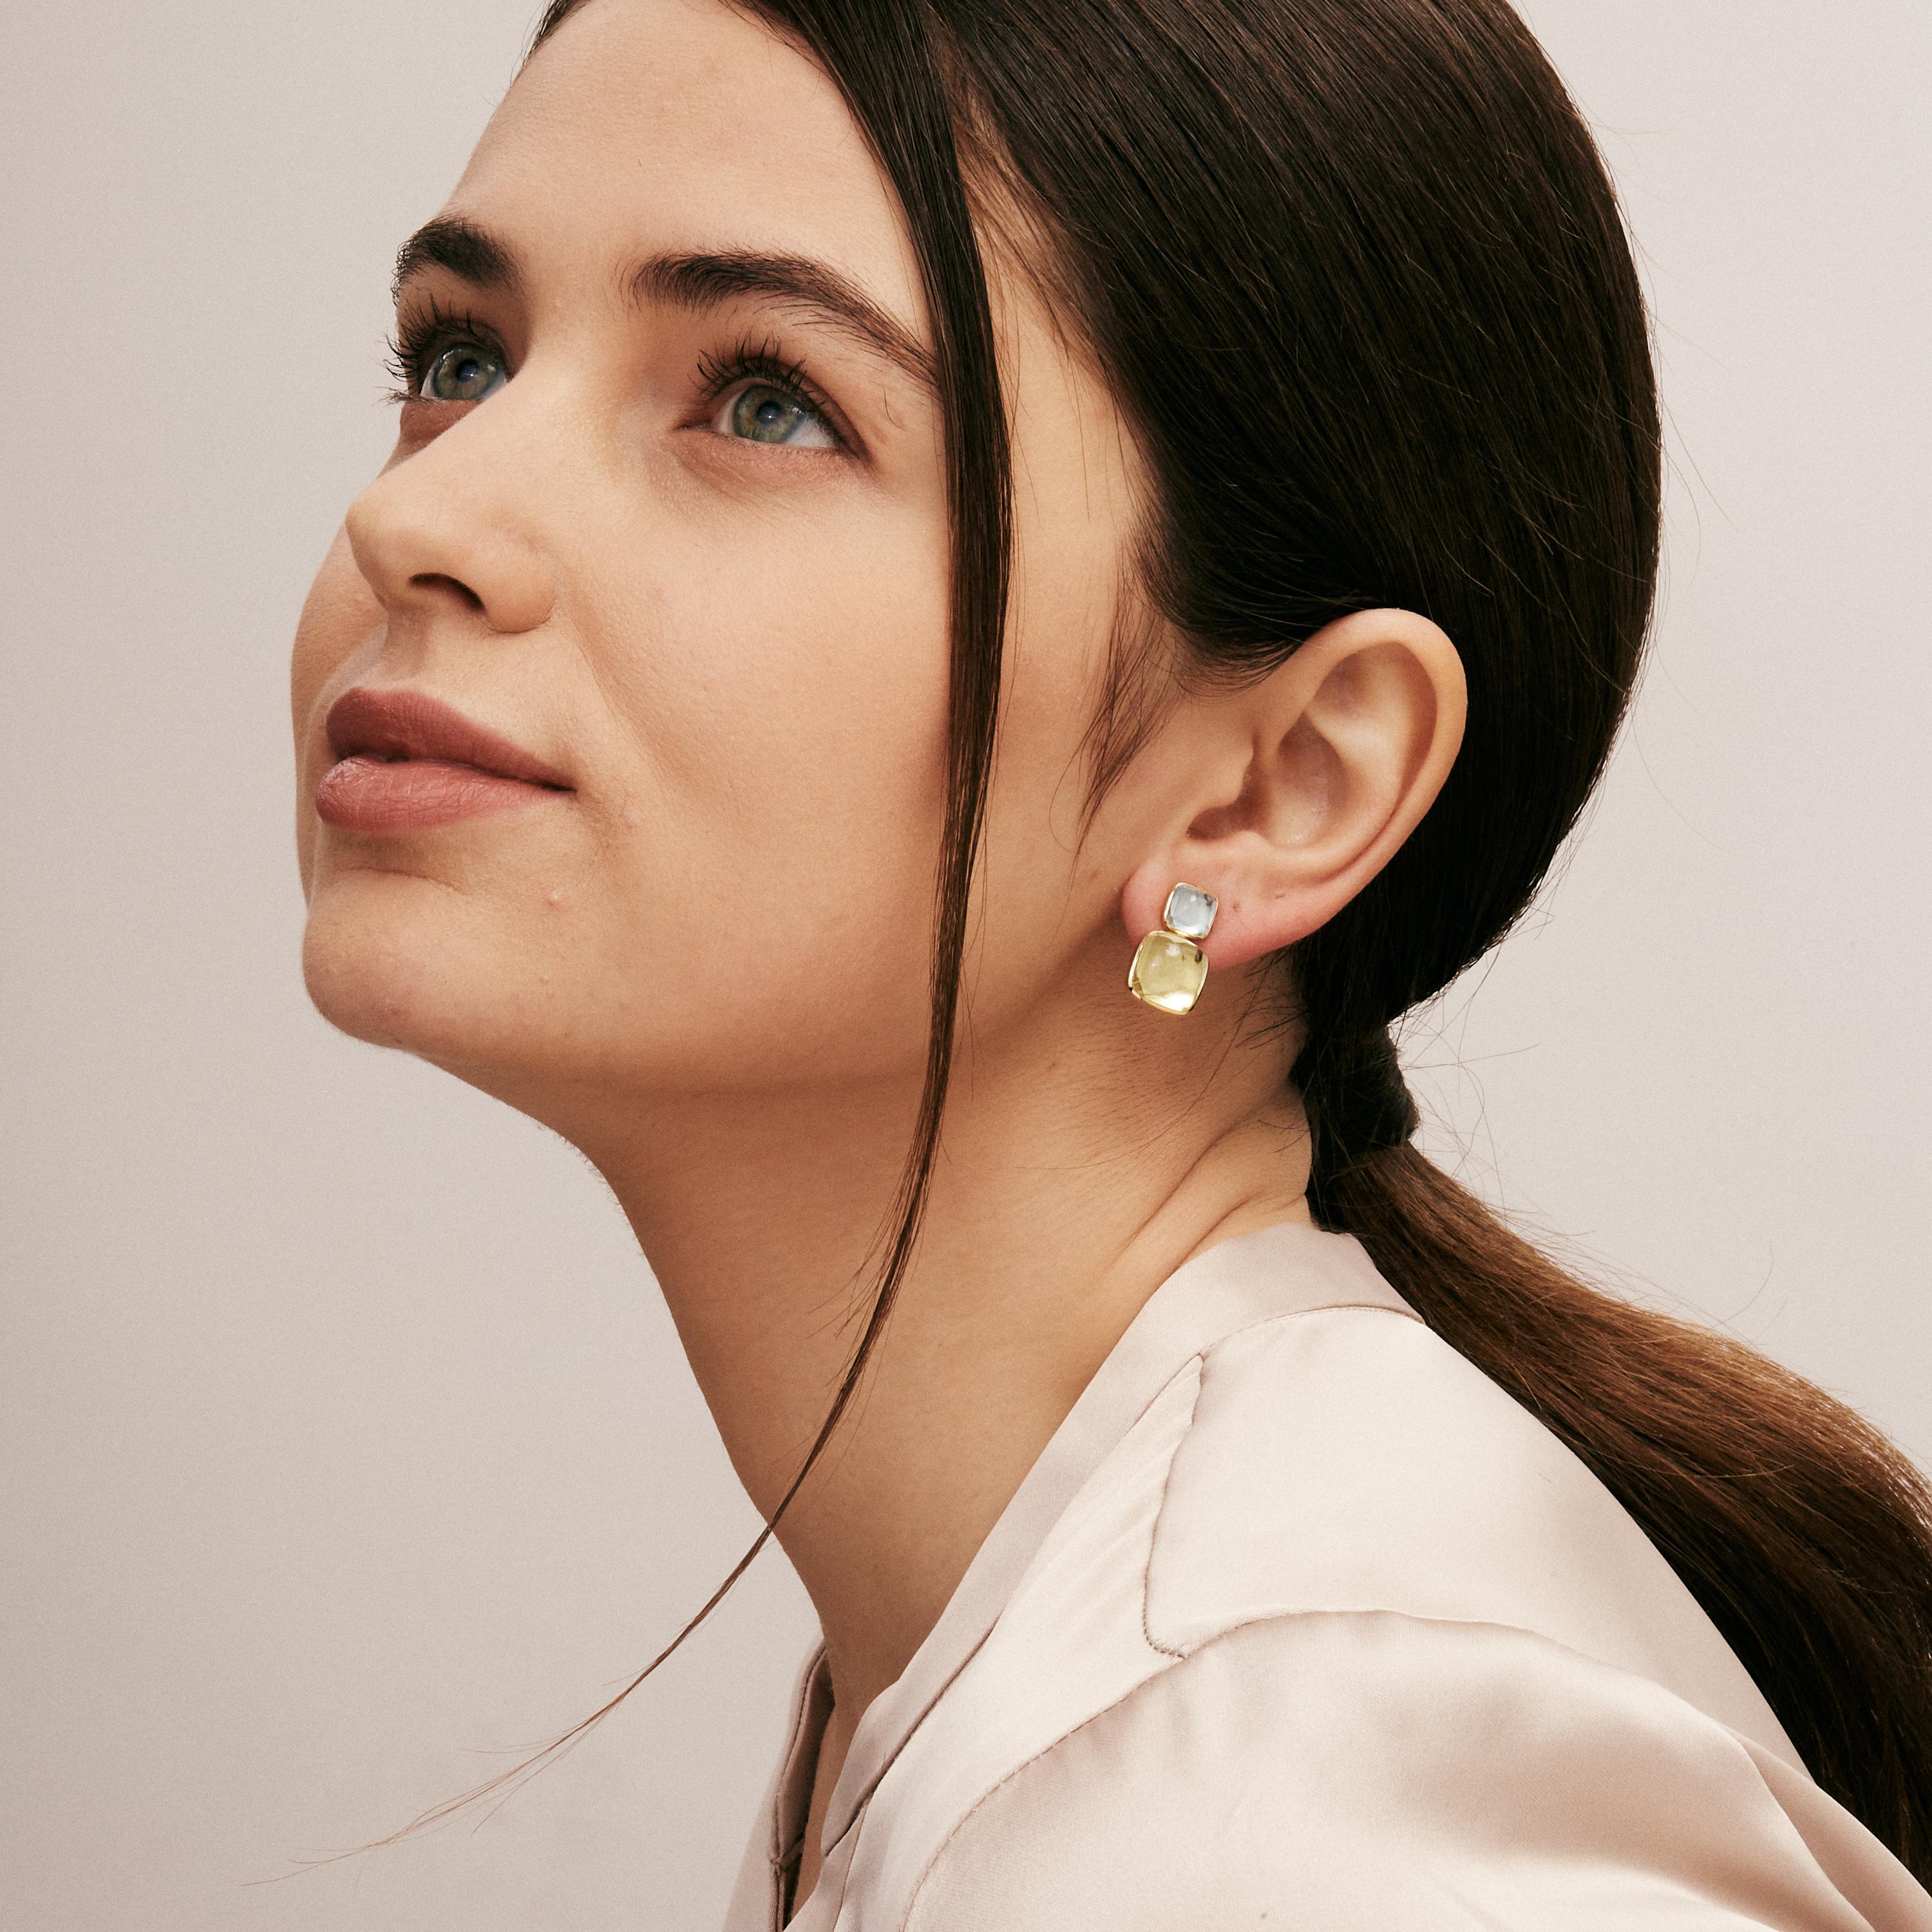 Created in 18kyg
Lemon quartz 12 carats approx.
Blue topaz 4.5 carats approx.
Omega clip backs
Limited edition

Exquisitely crafted in 18-karat-gold, these limited-edition earrings feature 12 carats of luminous lemon quartz, and 4.5 carats of